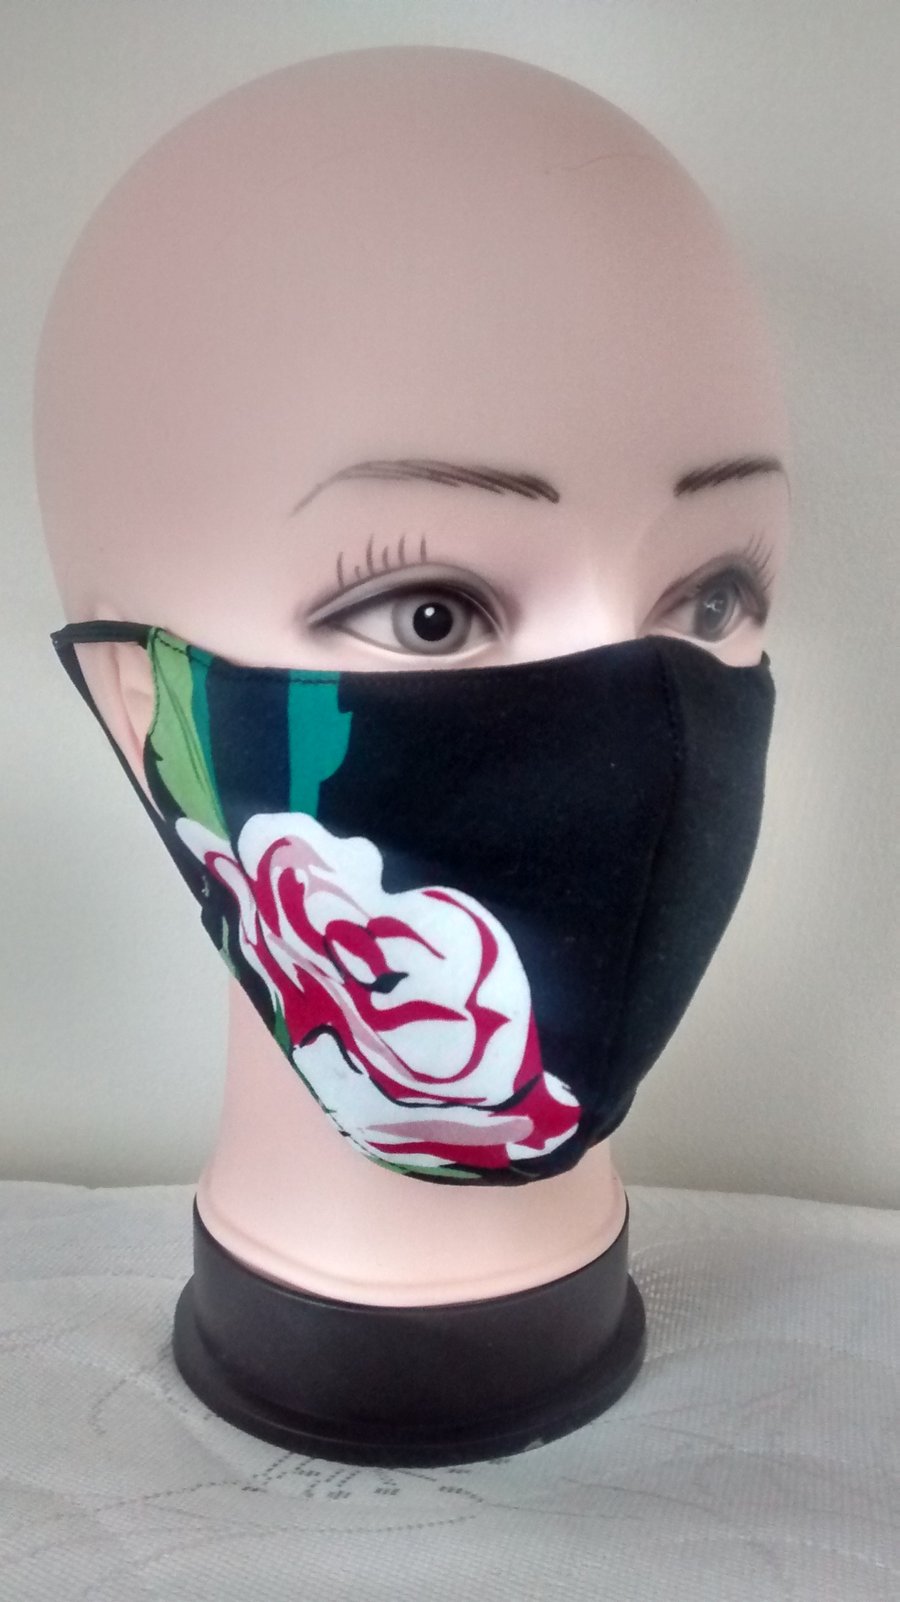 Handmade 3 layers small rose reusable adult face mask.